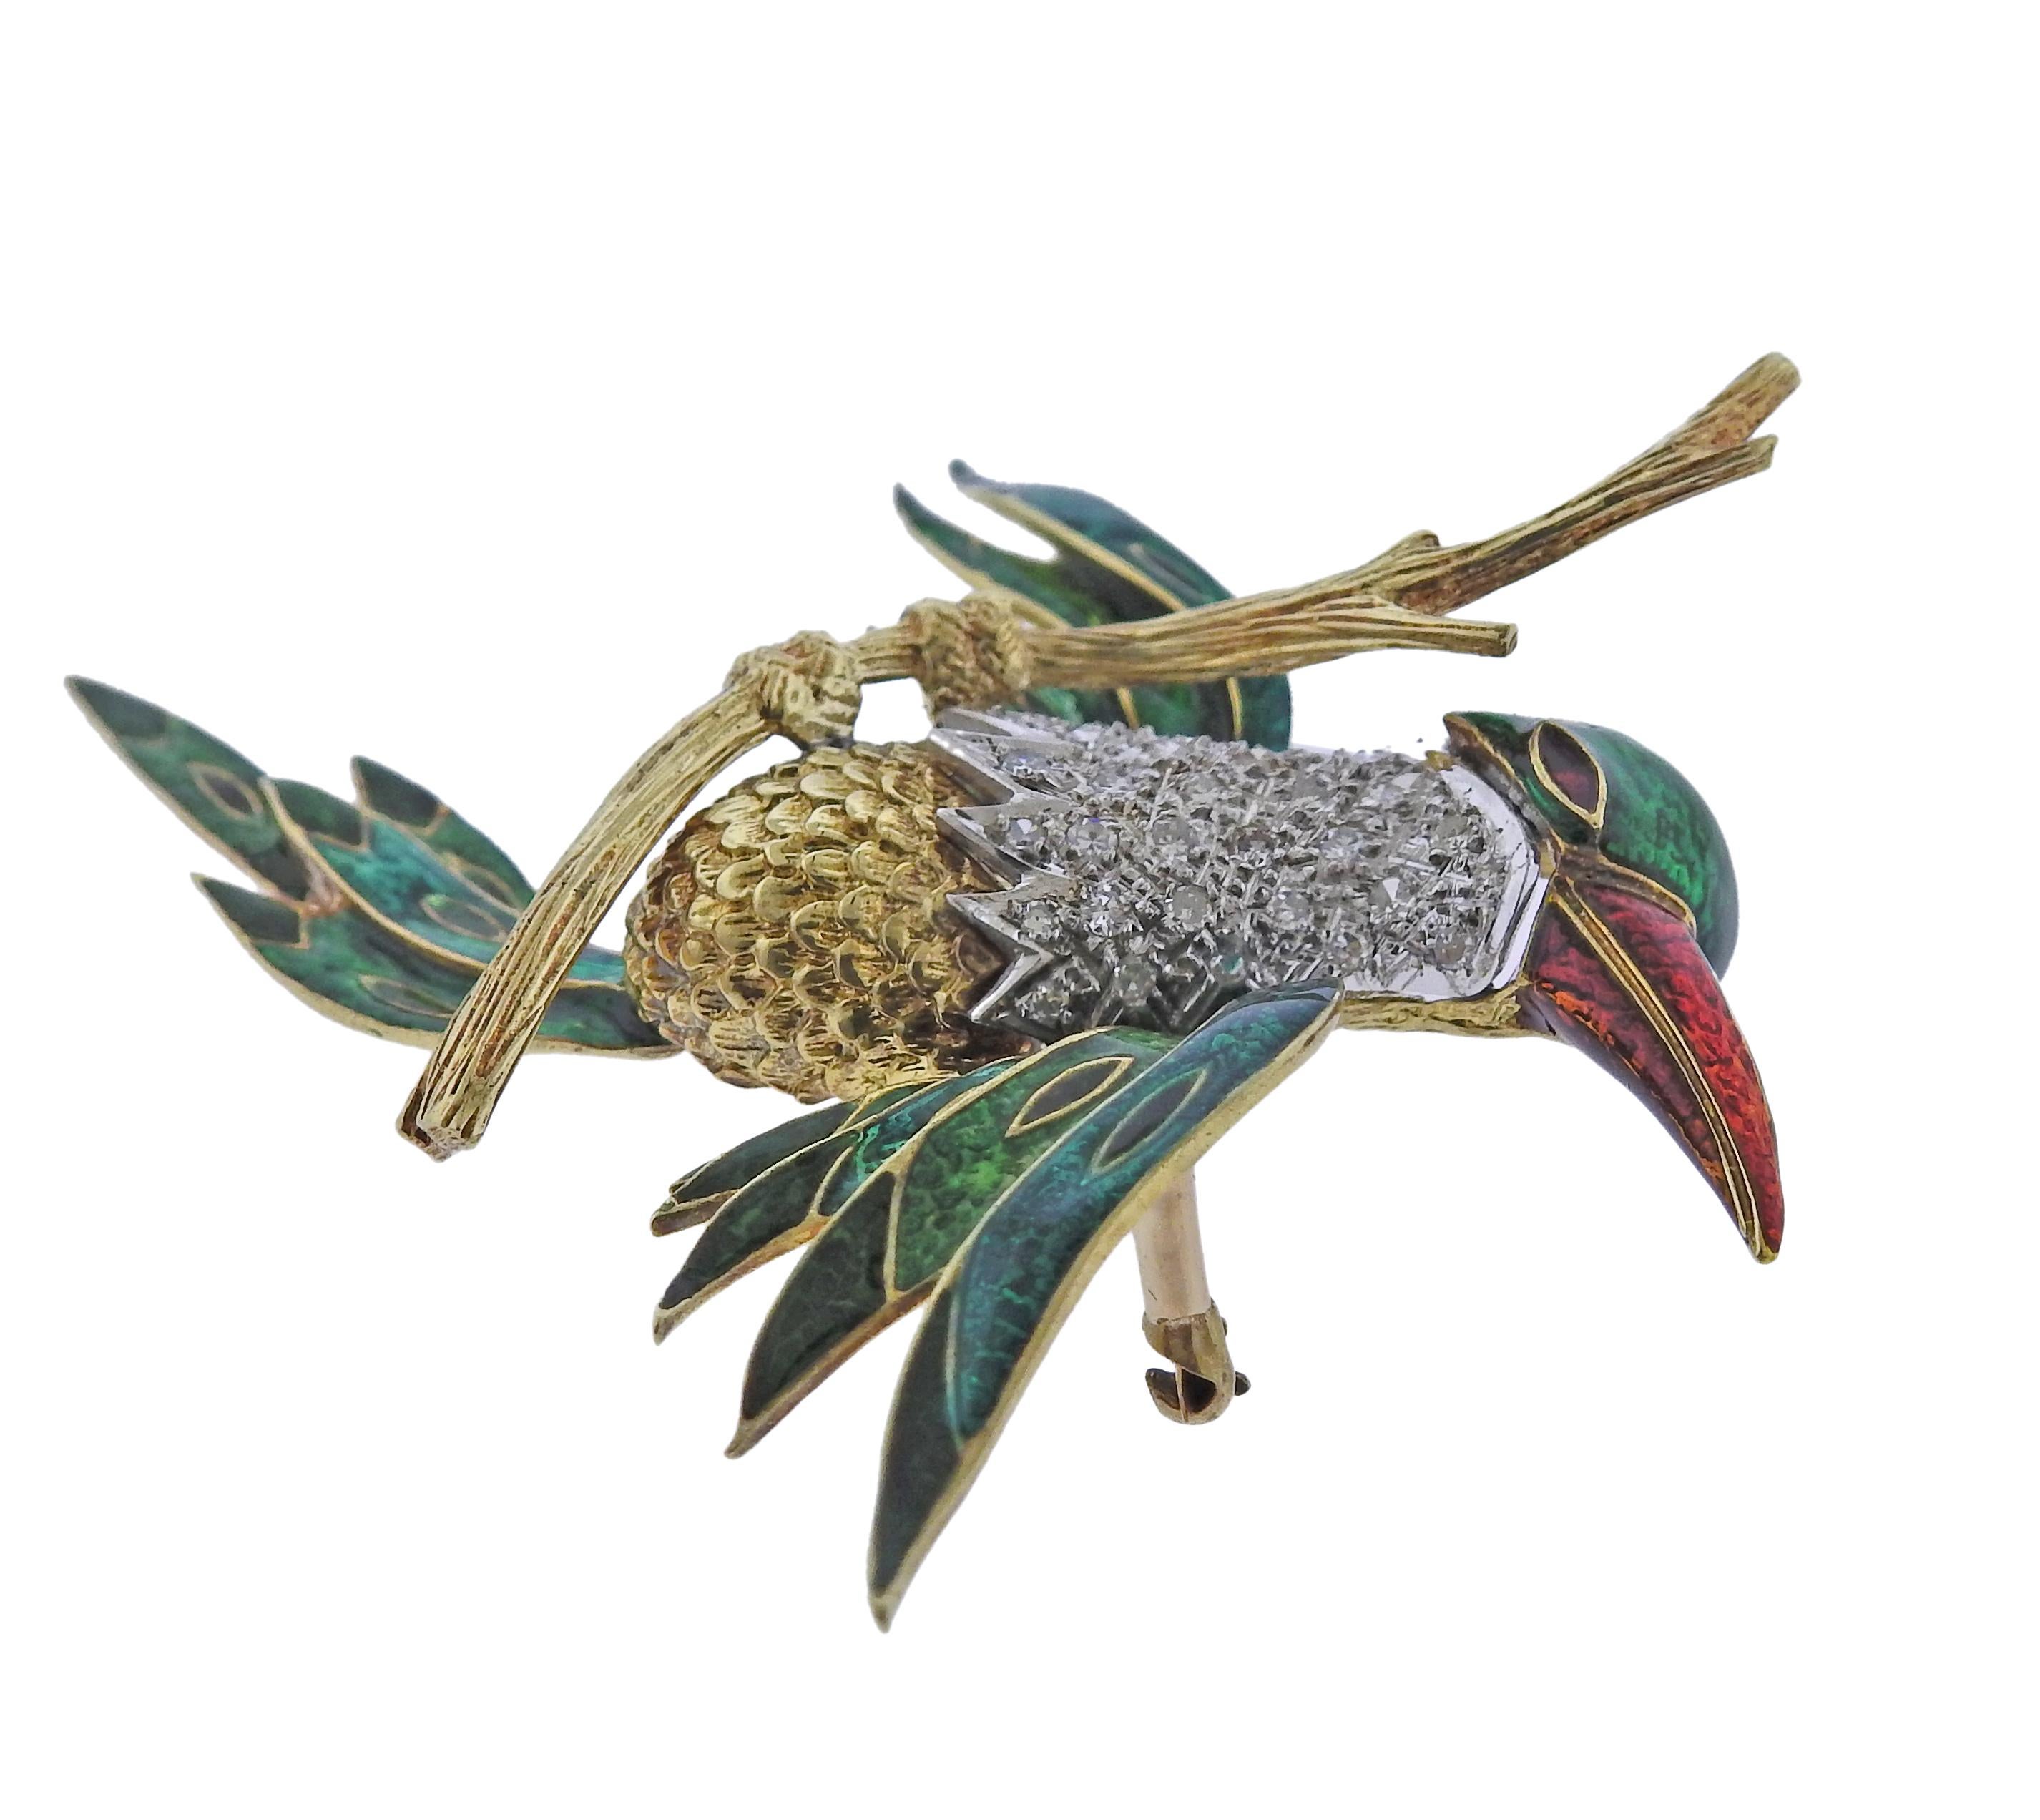 18k gold bird brooch, decorated with enamel and approx. 0.86ctw in diamonds. Brooch measures 72mm x 68mm. Weight - 27.6 grams.